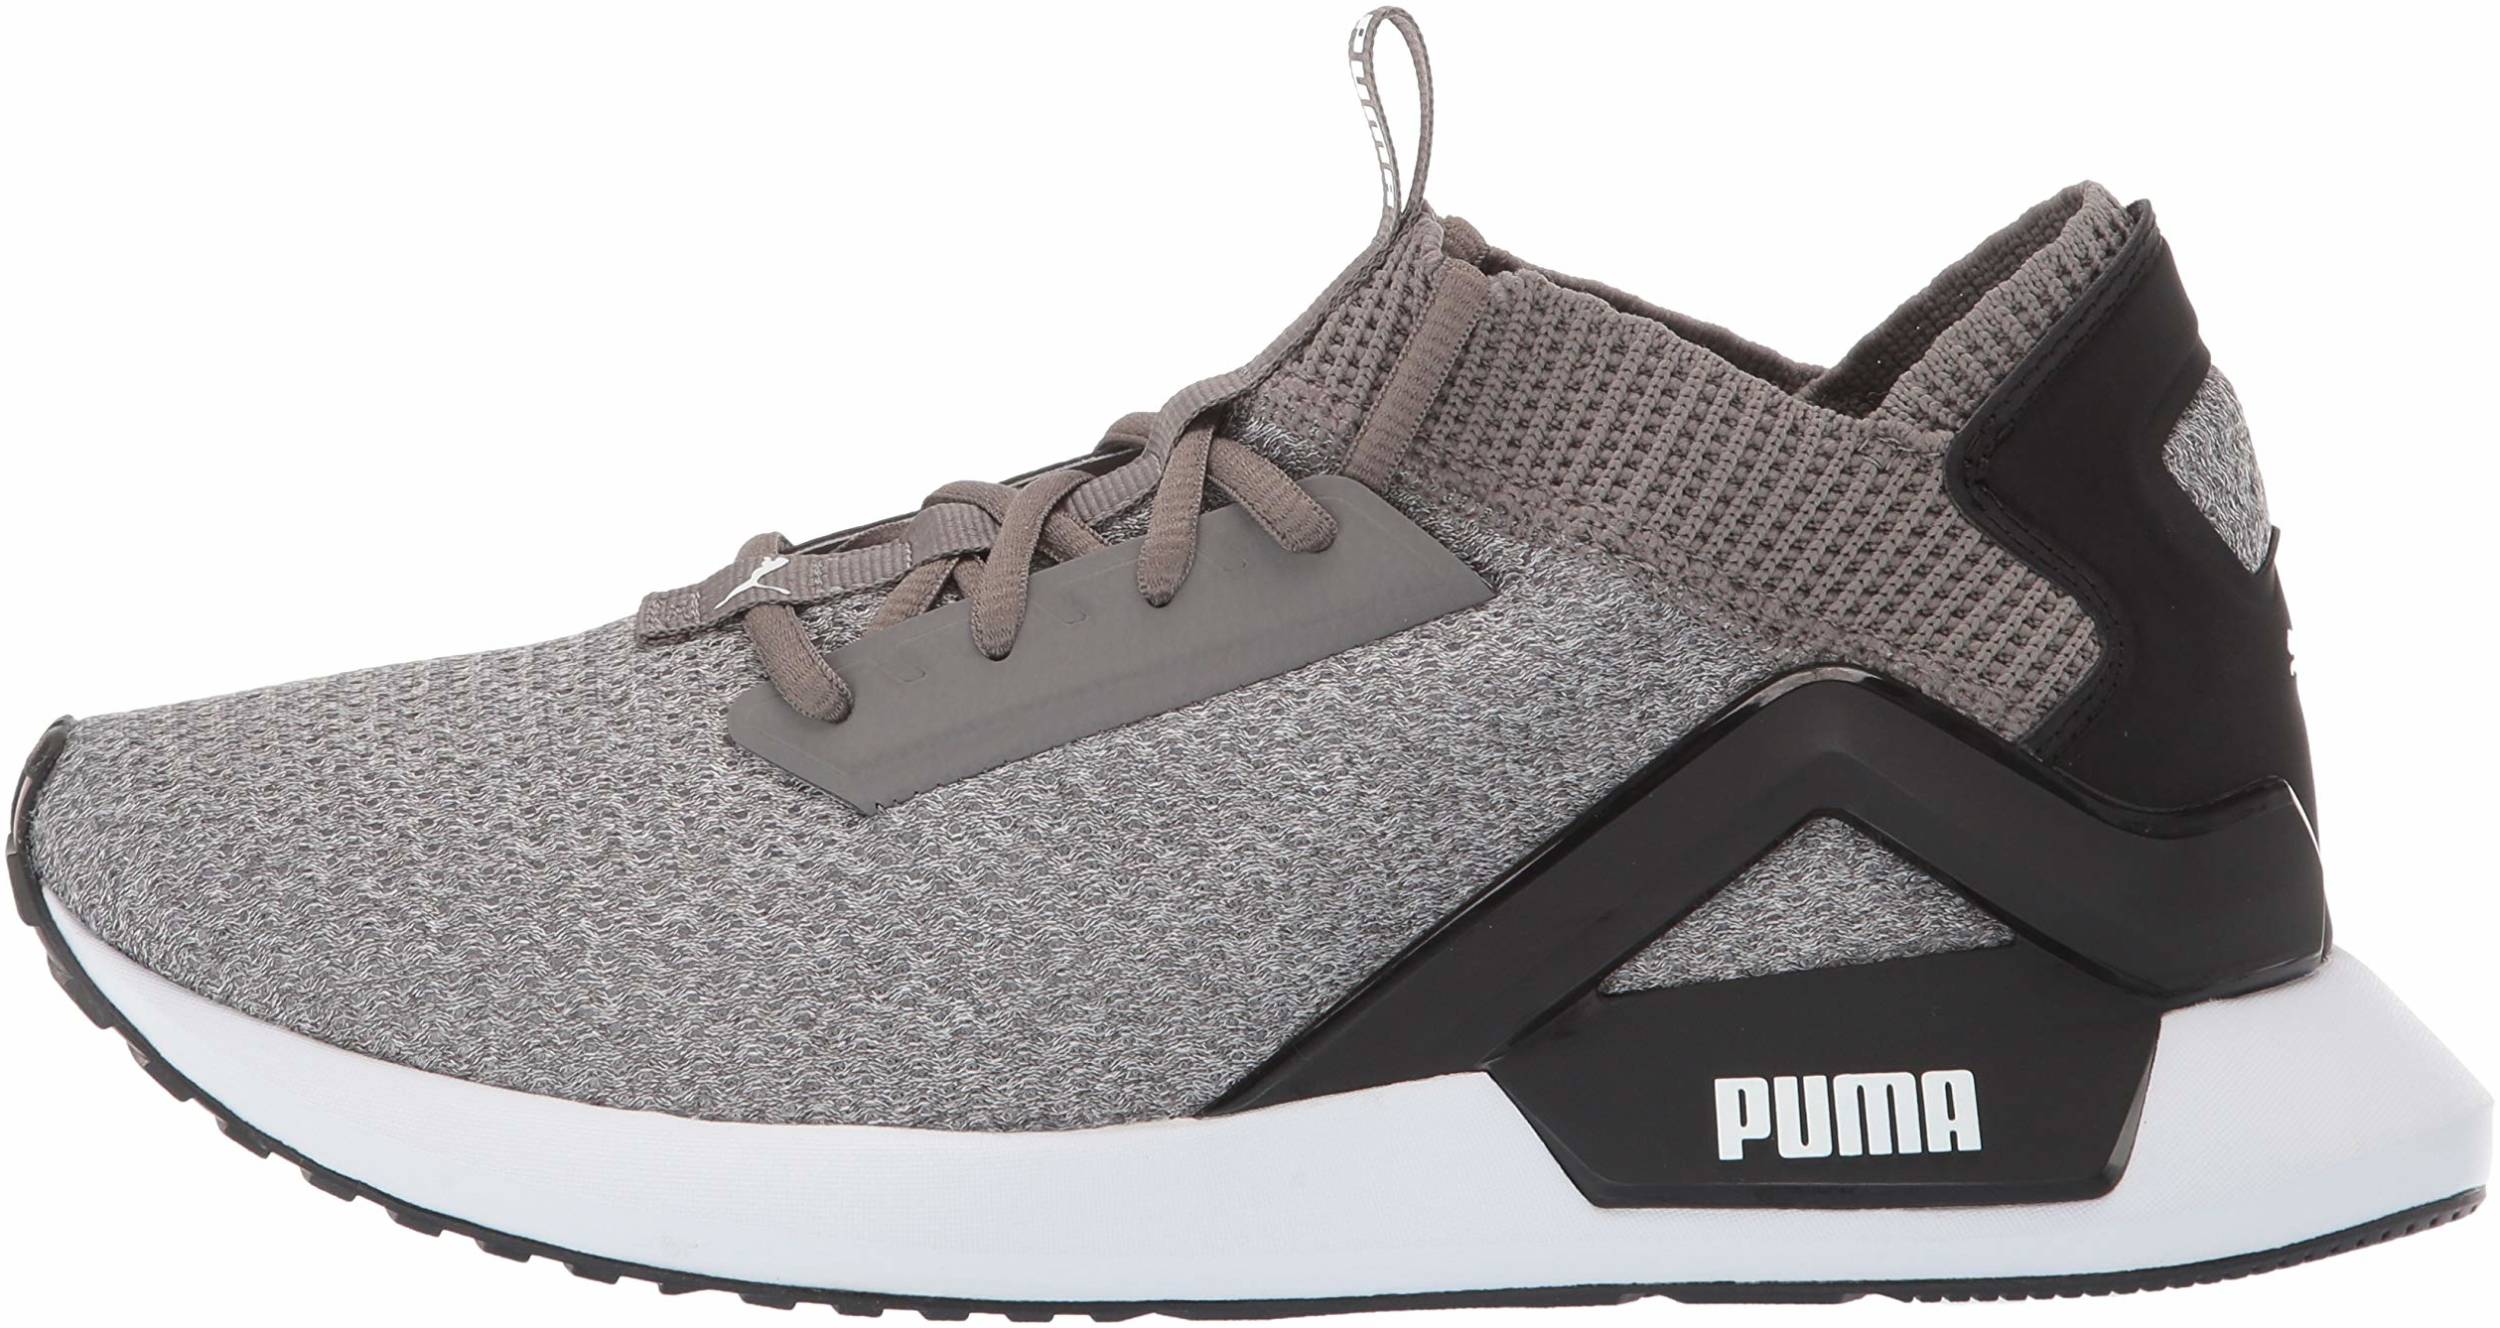 Save 64% on Puma Road Running Shoes (85 